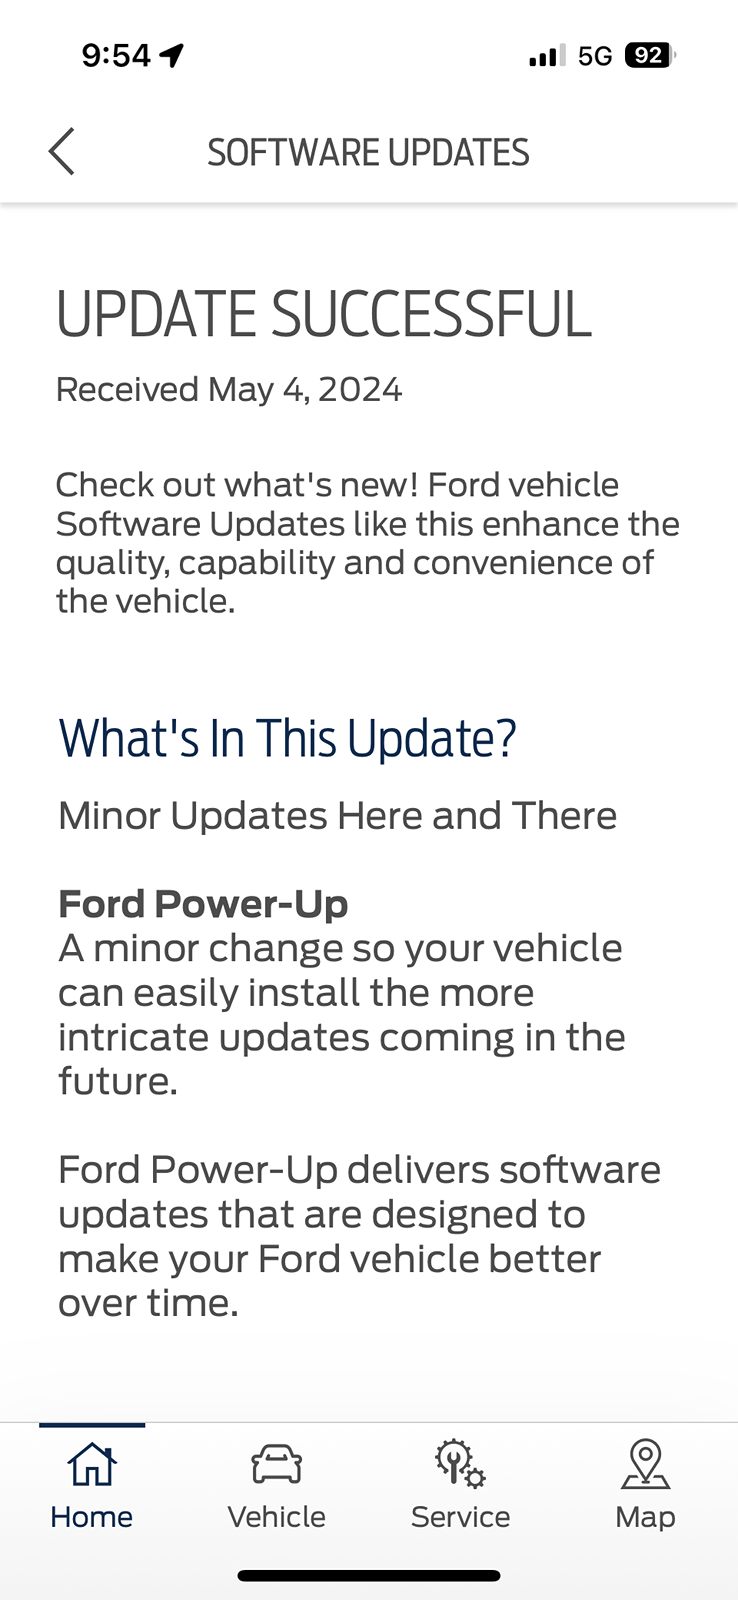 Ford F-150 Priority update - Audio 23-PU1024-6CHAUD-Now low volume, poor audio quality, no bass response IMG_2671